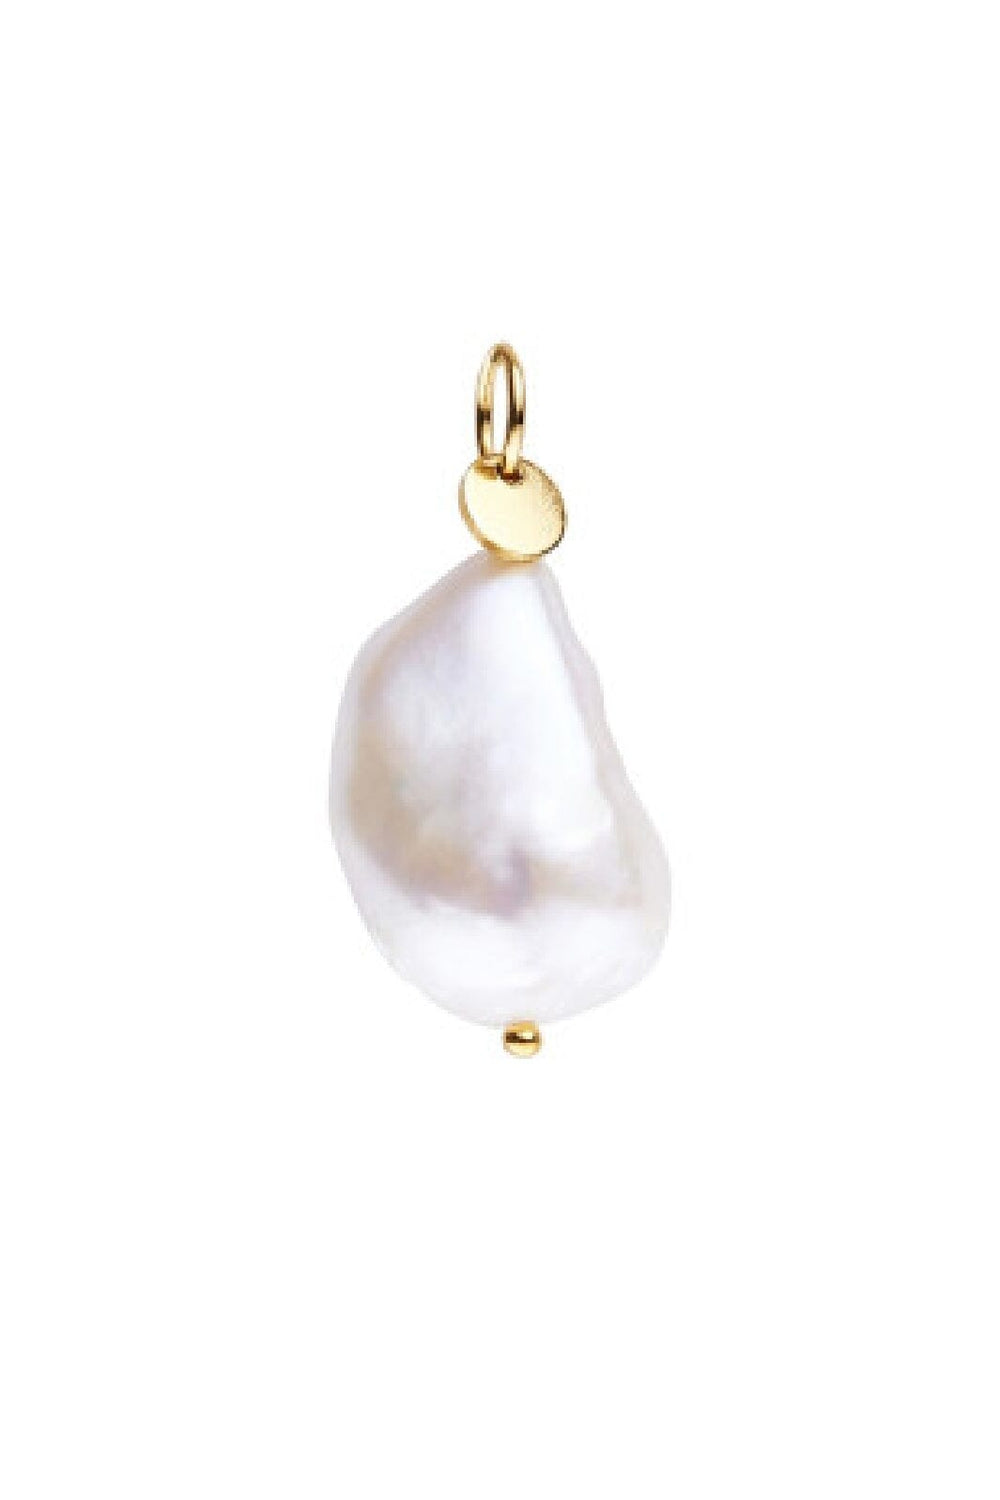 Stine A - Baroque Pearl Pendant - 5036-02-Os Vedhæng 